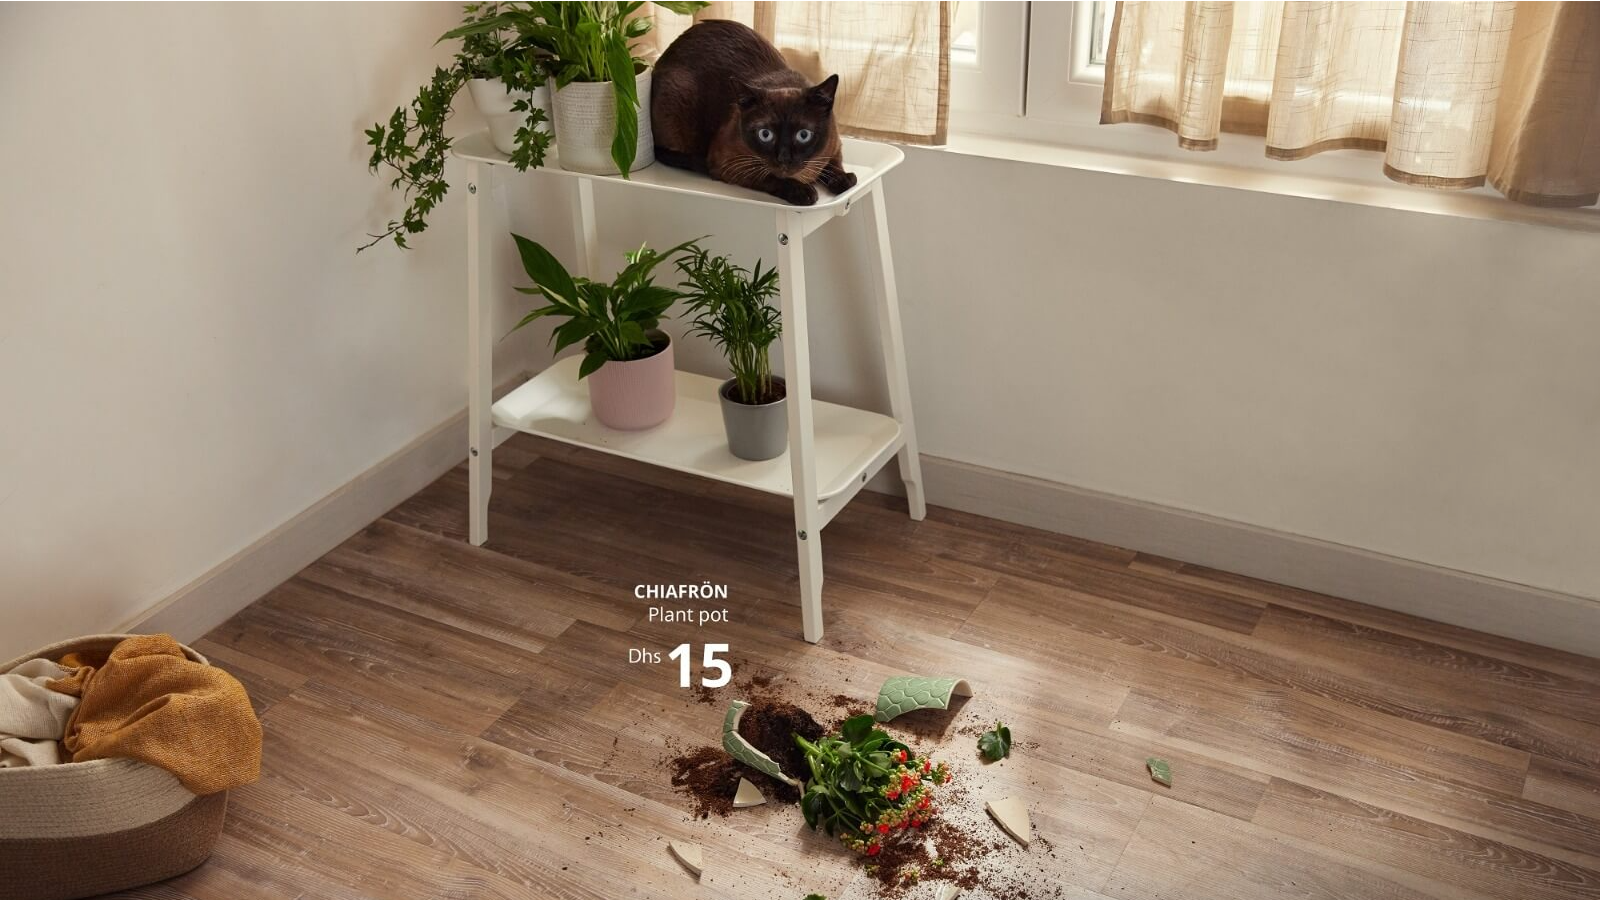 Ikea's Pet-Friendly Ad Campaign Offers Affordable Solutions